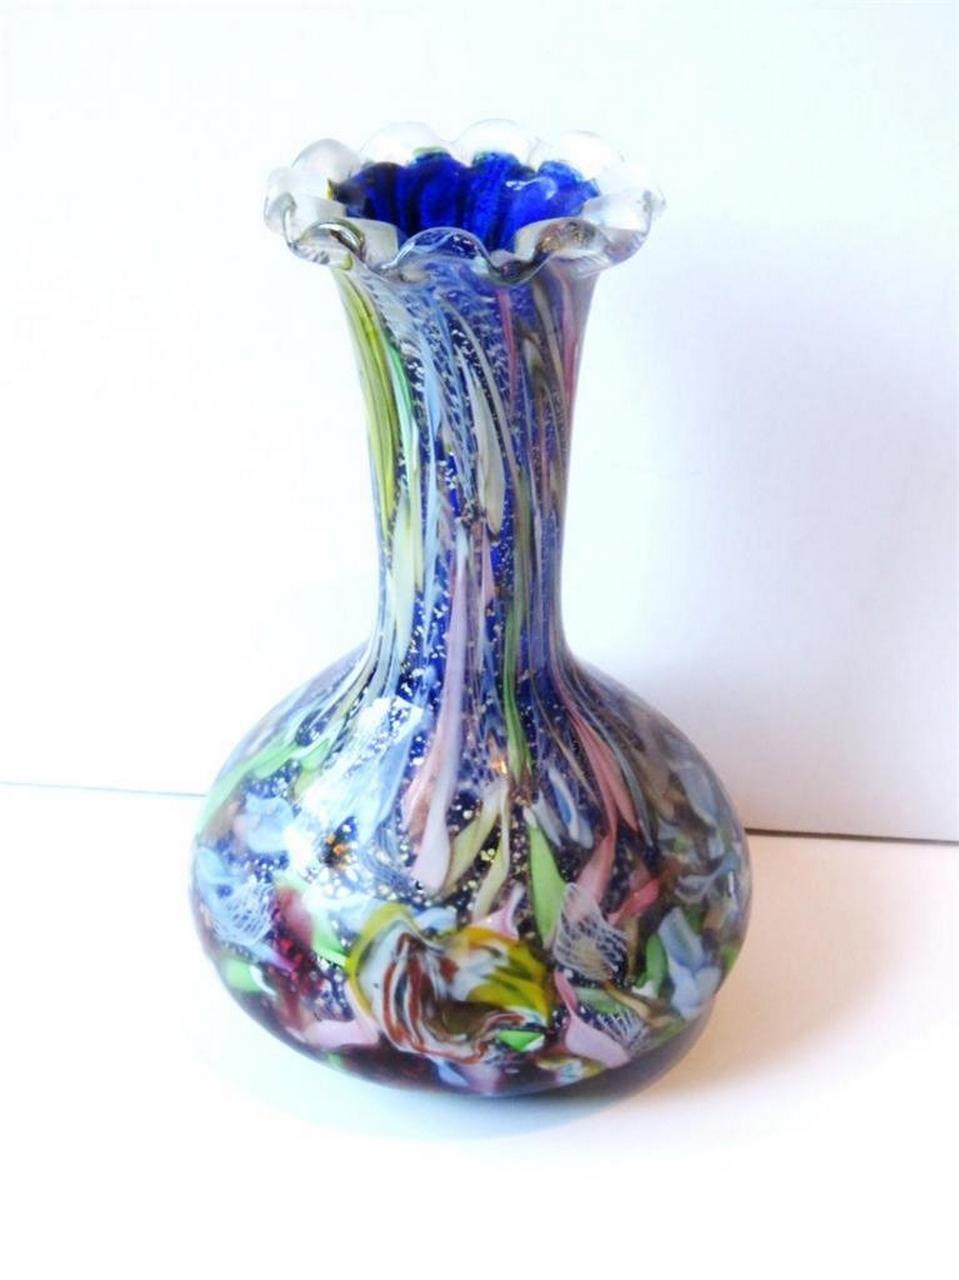 The Following Items we are offering is this Rare Important Italian Millefiori Large Multi Colored Flared Rim Glass Vase attributed to Fratelli Toso. Fantastic Detail with a Magnificent Array of Beautiful Colors overlaid on a Cobalt Blue Vase.